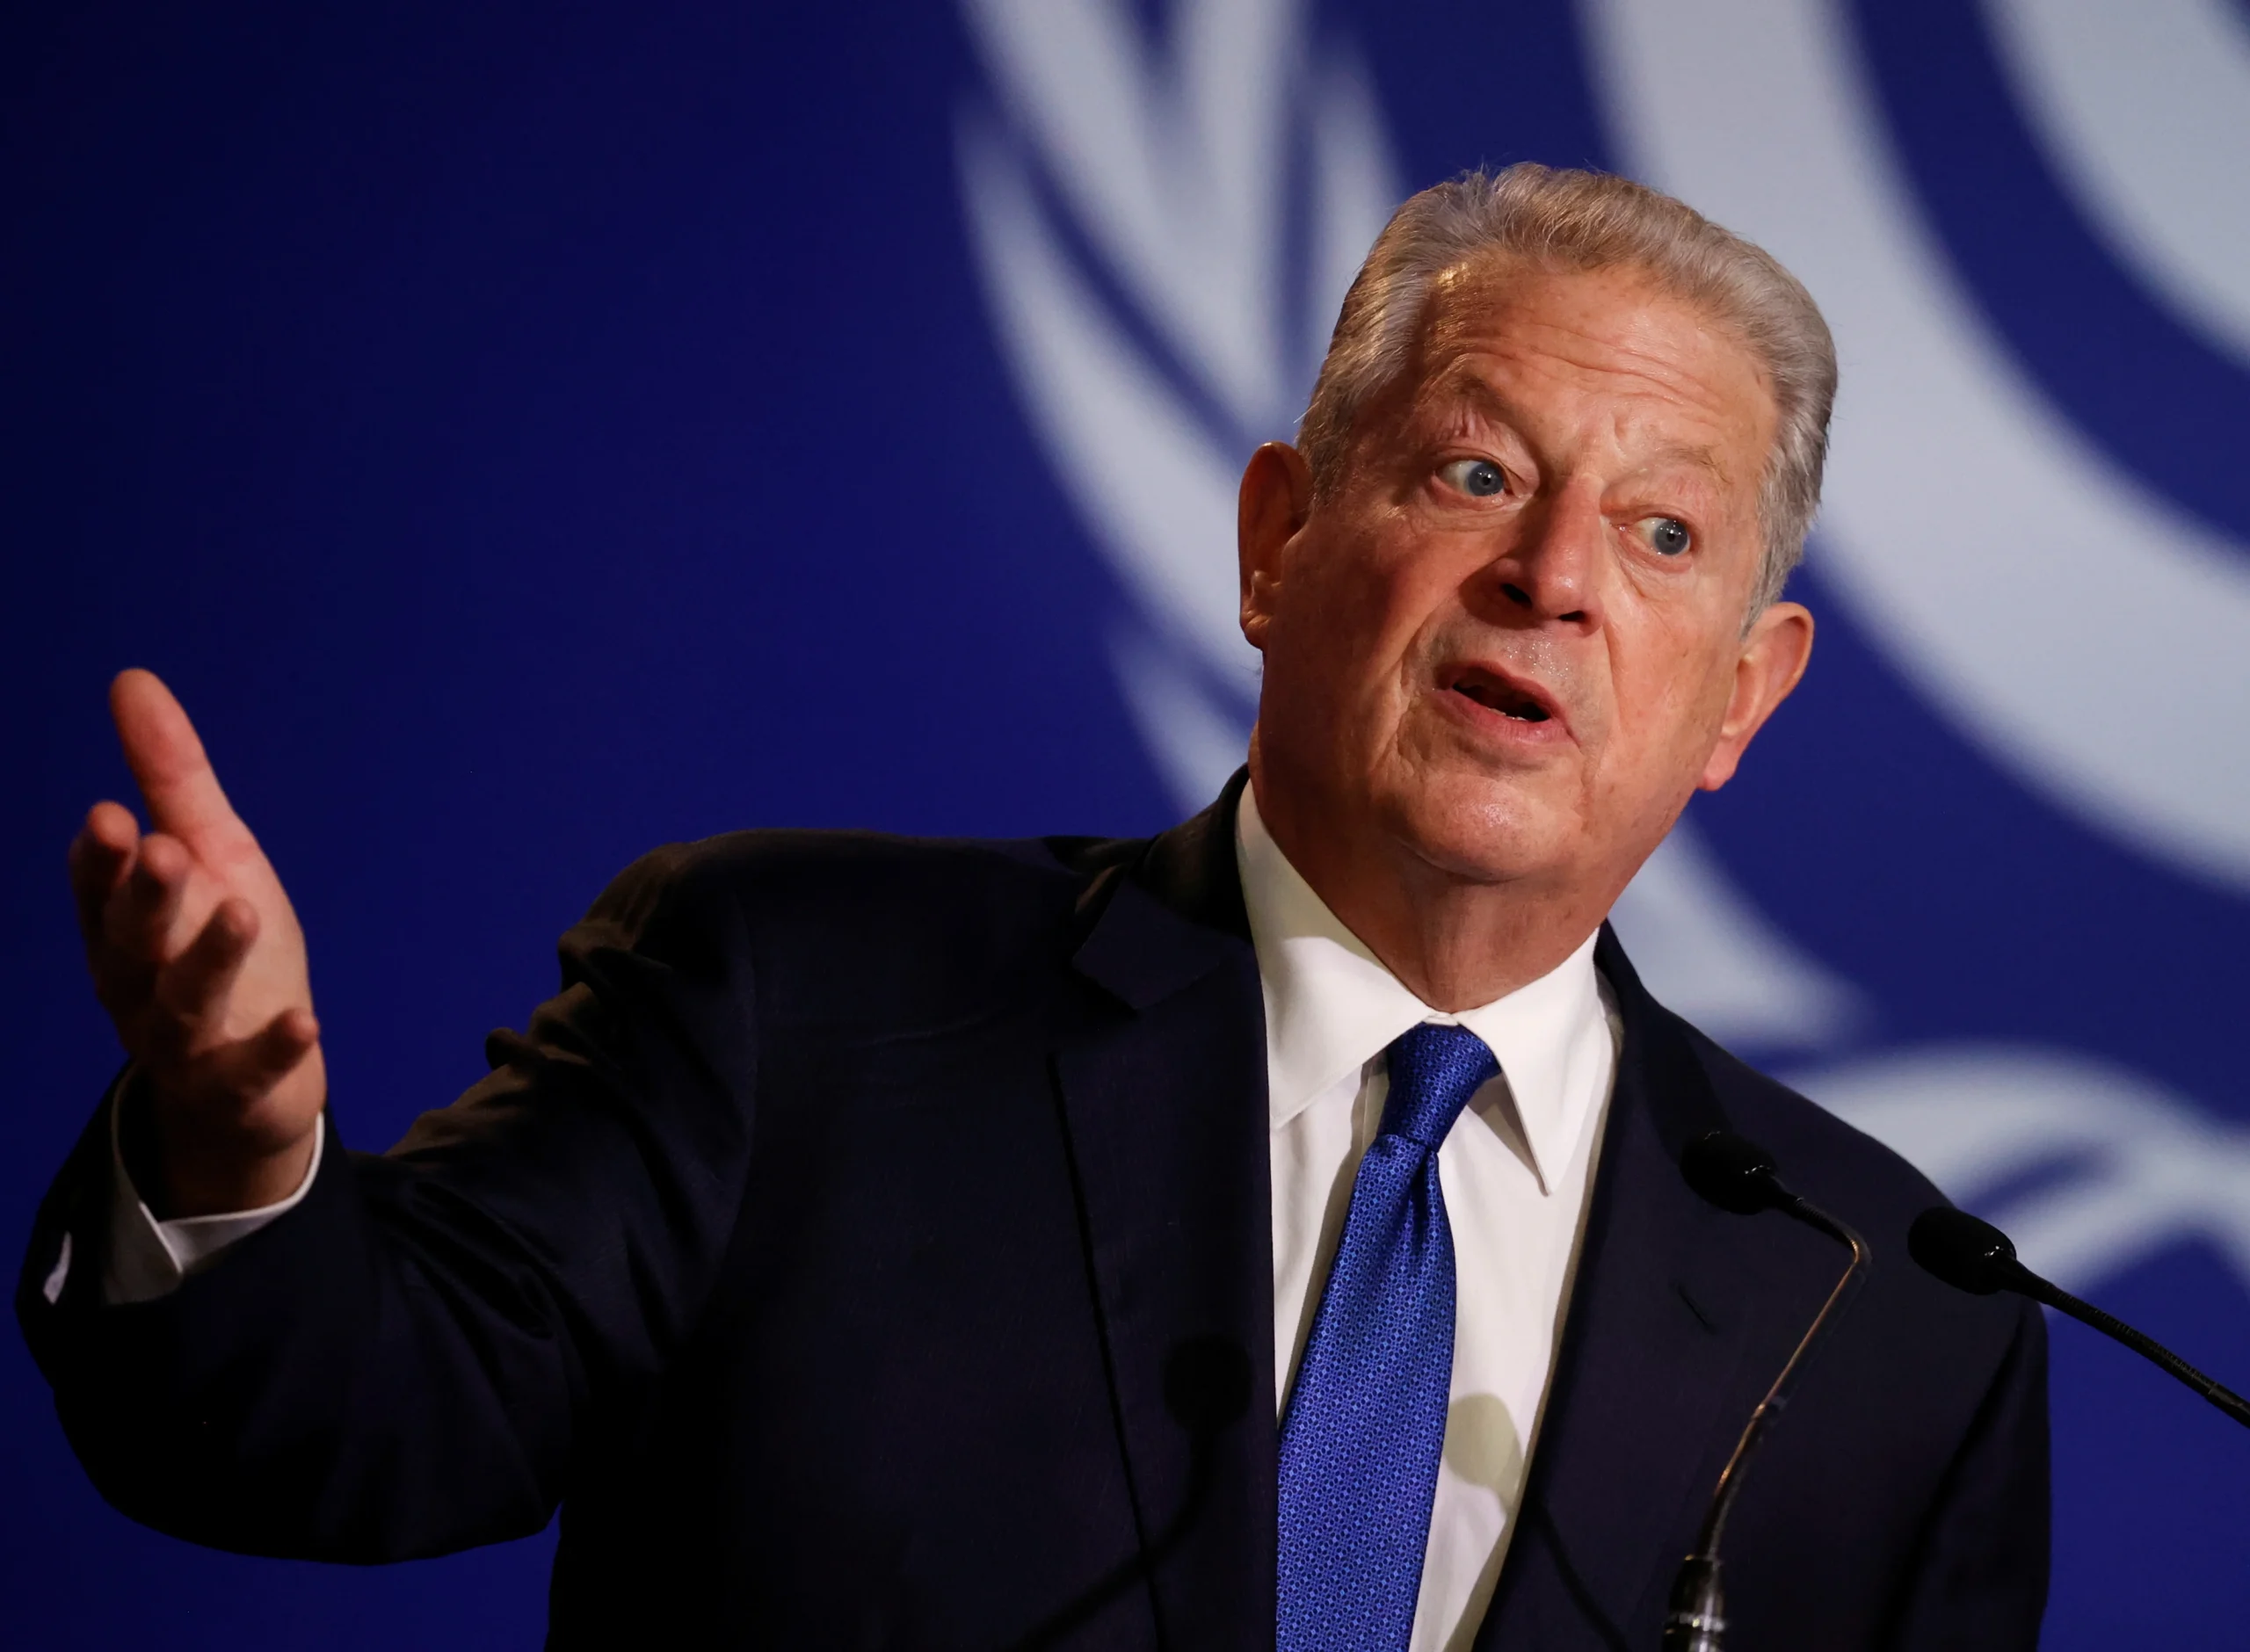 Countries are trying to opt out of COP28 fossil fuel deal, says Al Gore